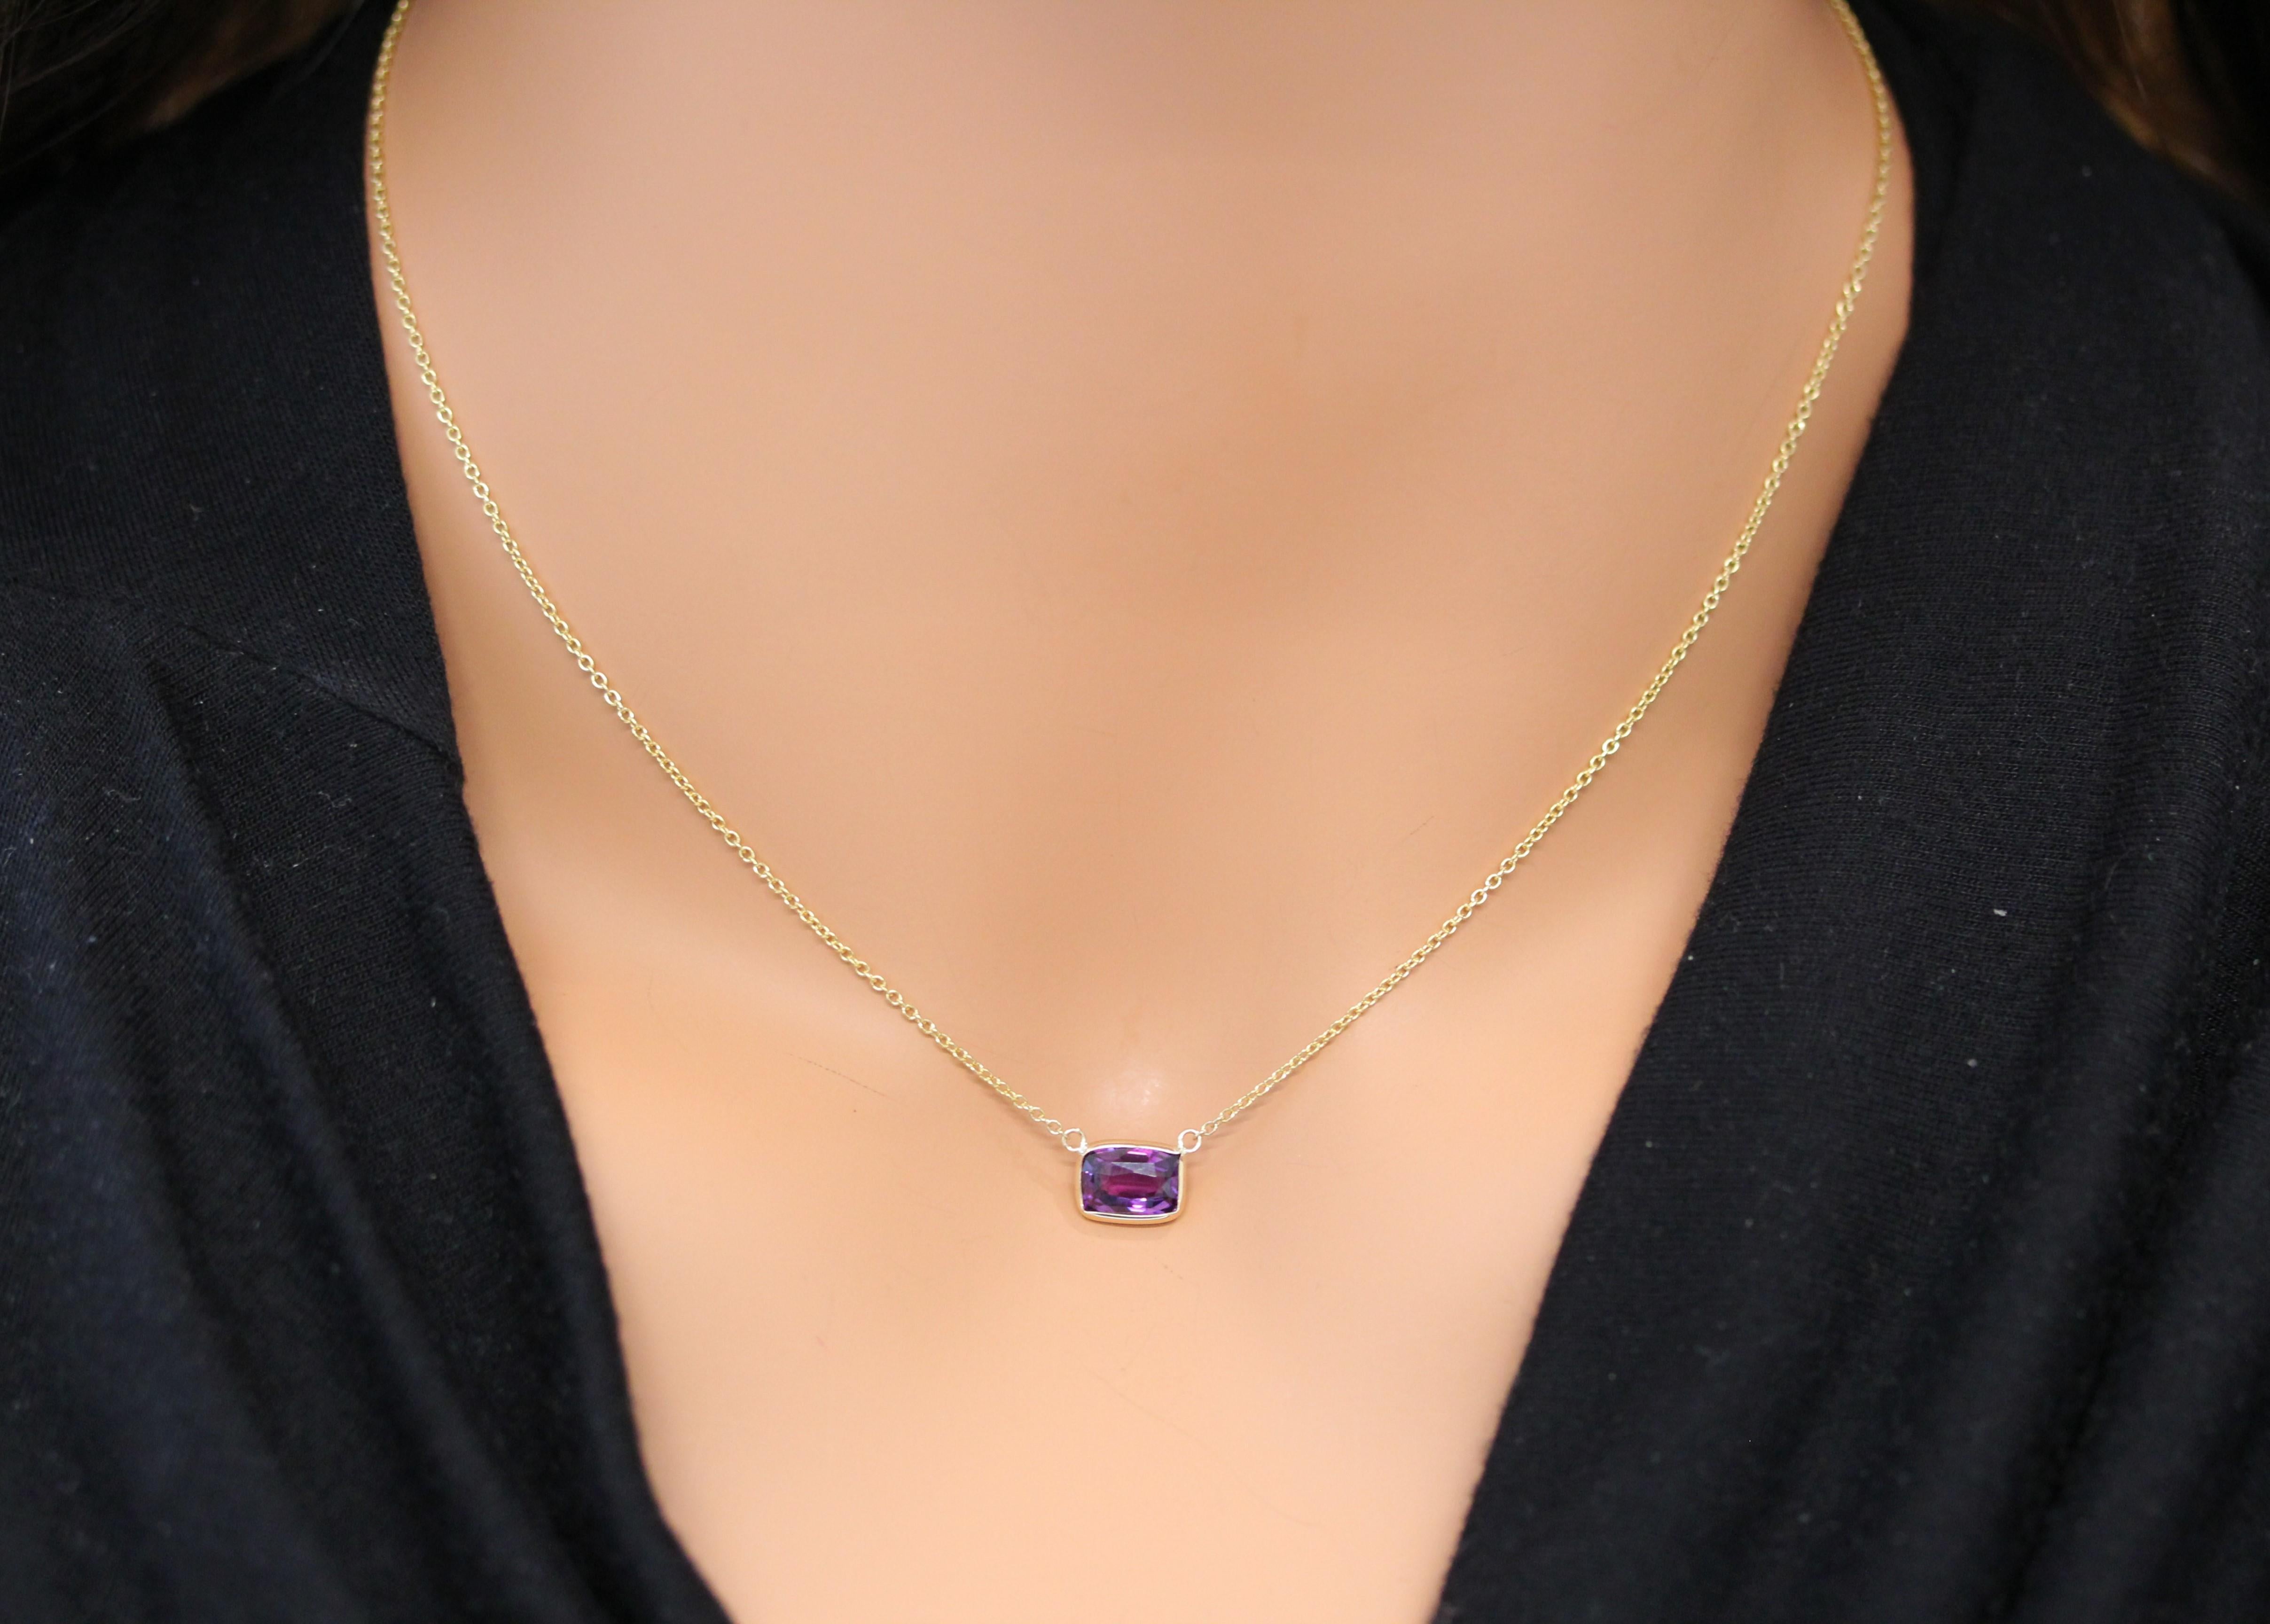 The necklace features a 1.97-carat cushion-cut purple sapphire set in a 14 karat yellow gold pendant or setting. The cushion cut's soft edges and the purple sapphire's color against the yellow gold setting are likely to create an elegant and